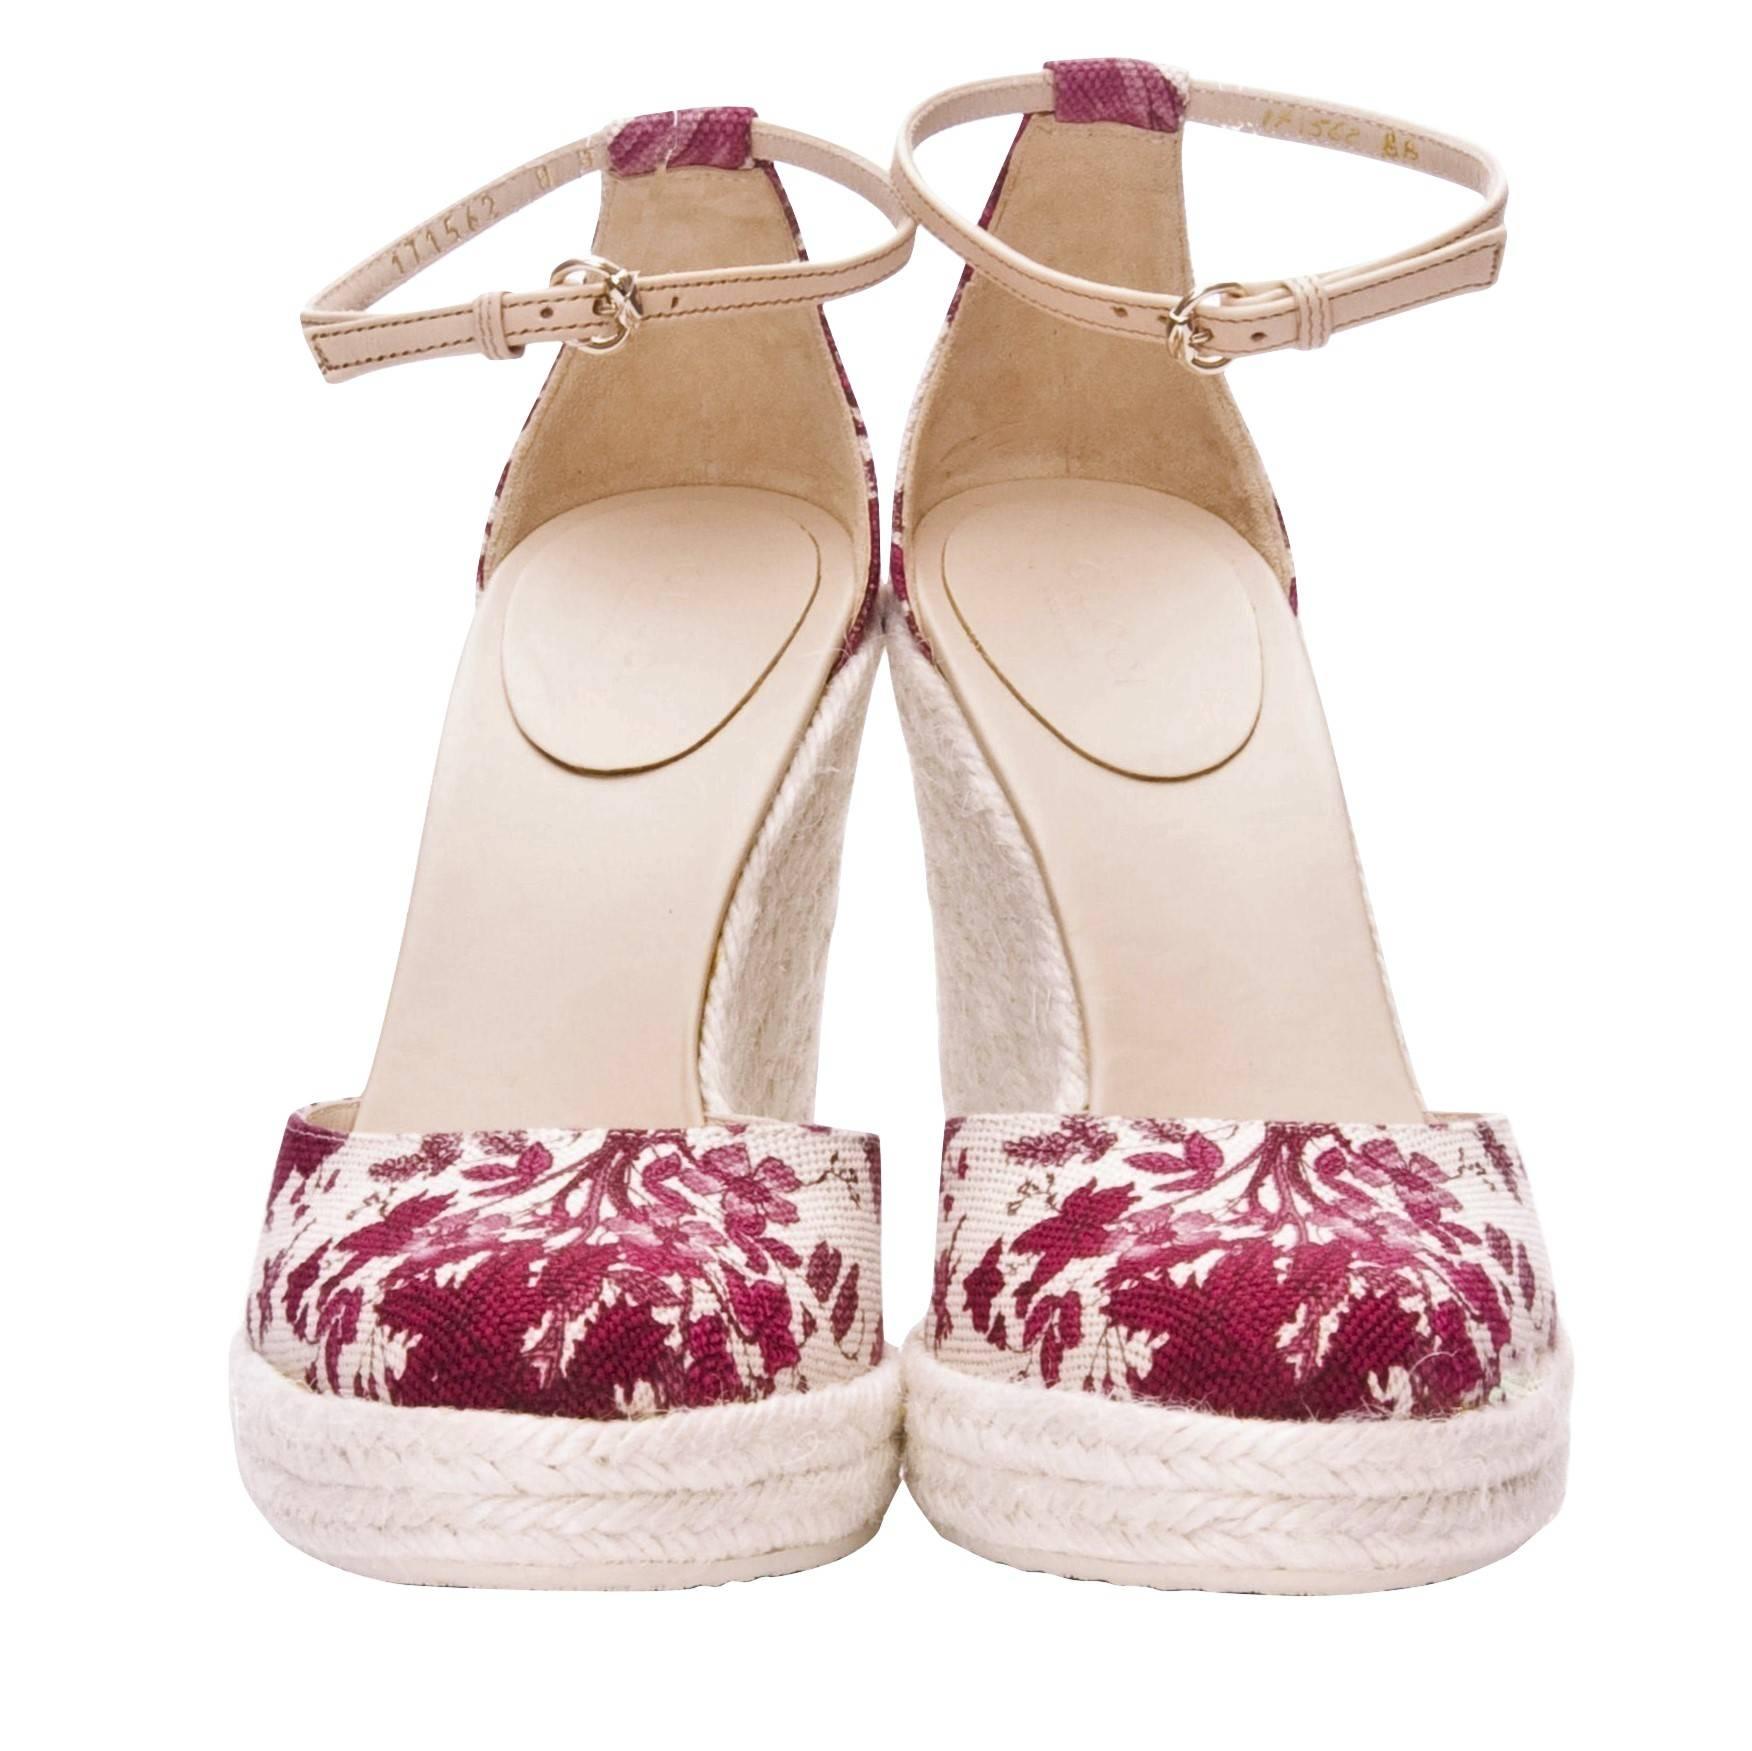 New Gucci Cruise New 2007 Runway Flora Wedge Espadrille Heels Sz 9 For Sale 2